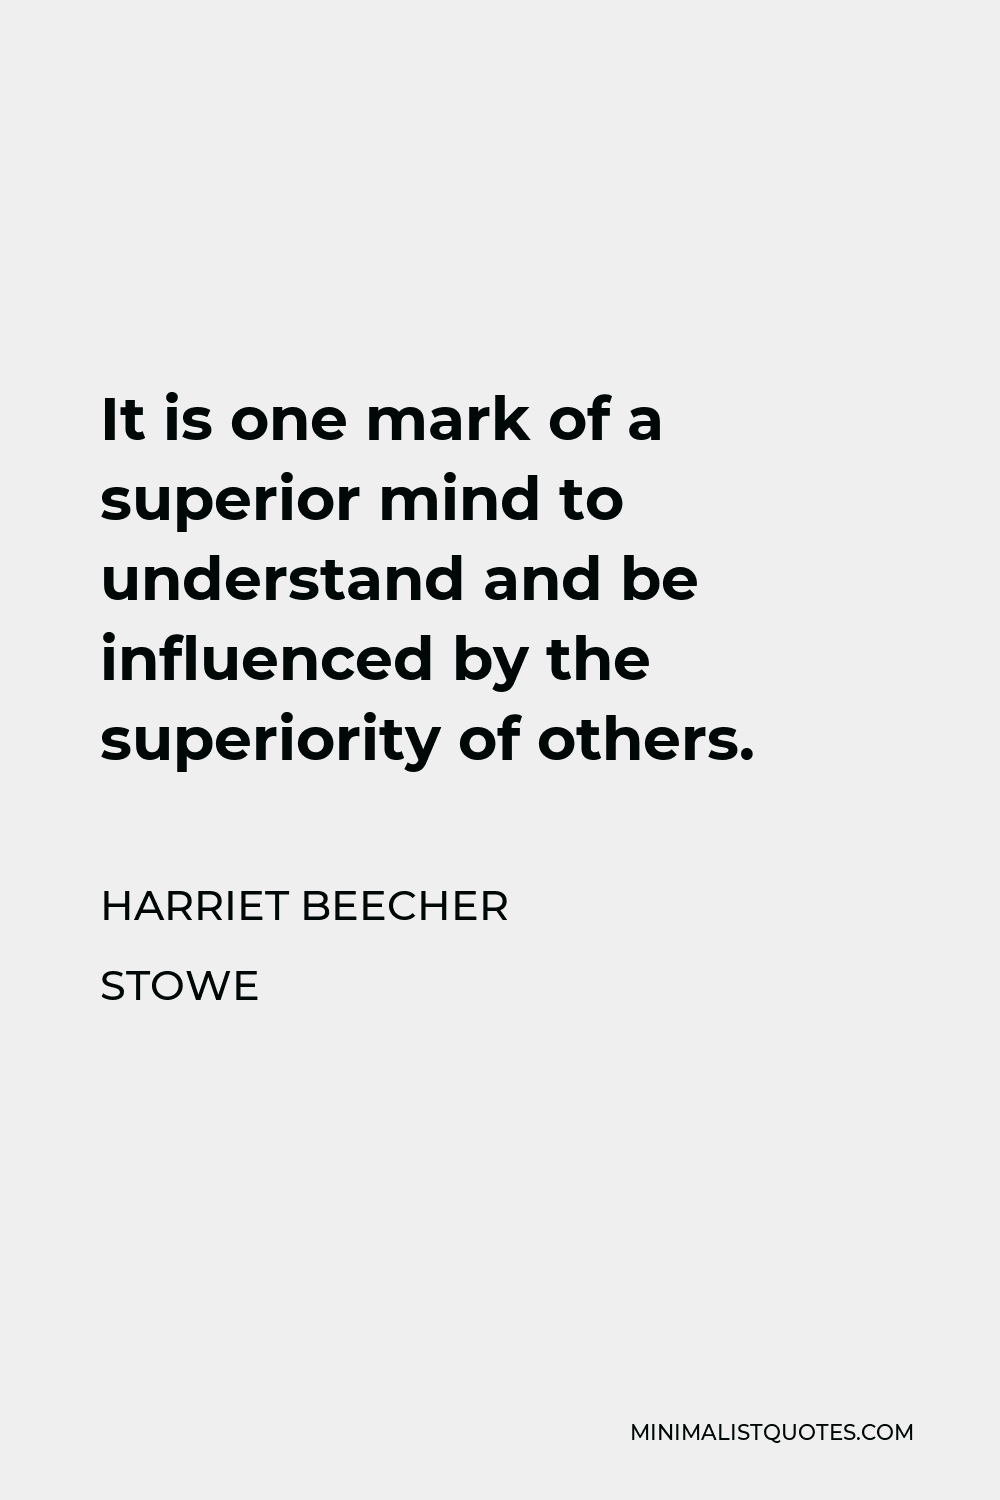 Harriet Beecher Stowe Quote - It is one mark of a superior mind to understand and be influenced by the superiority of others.